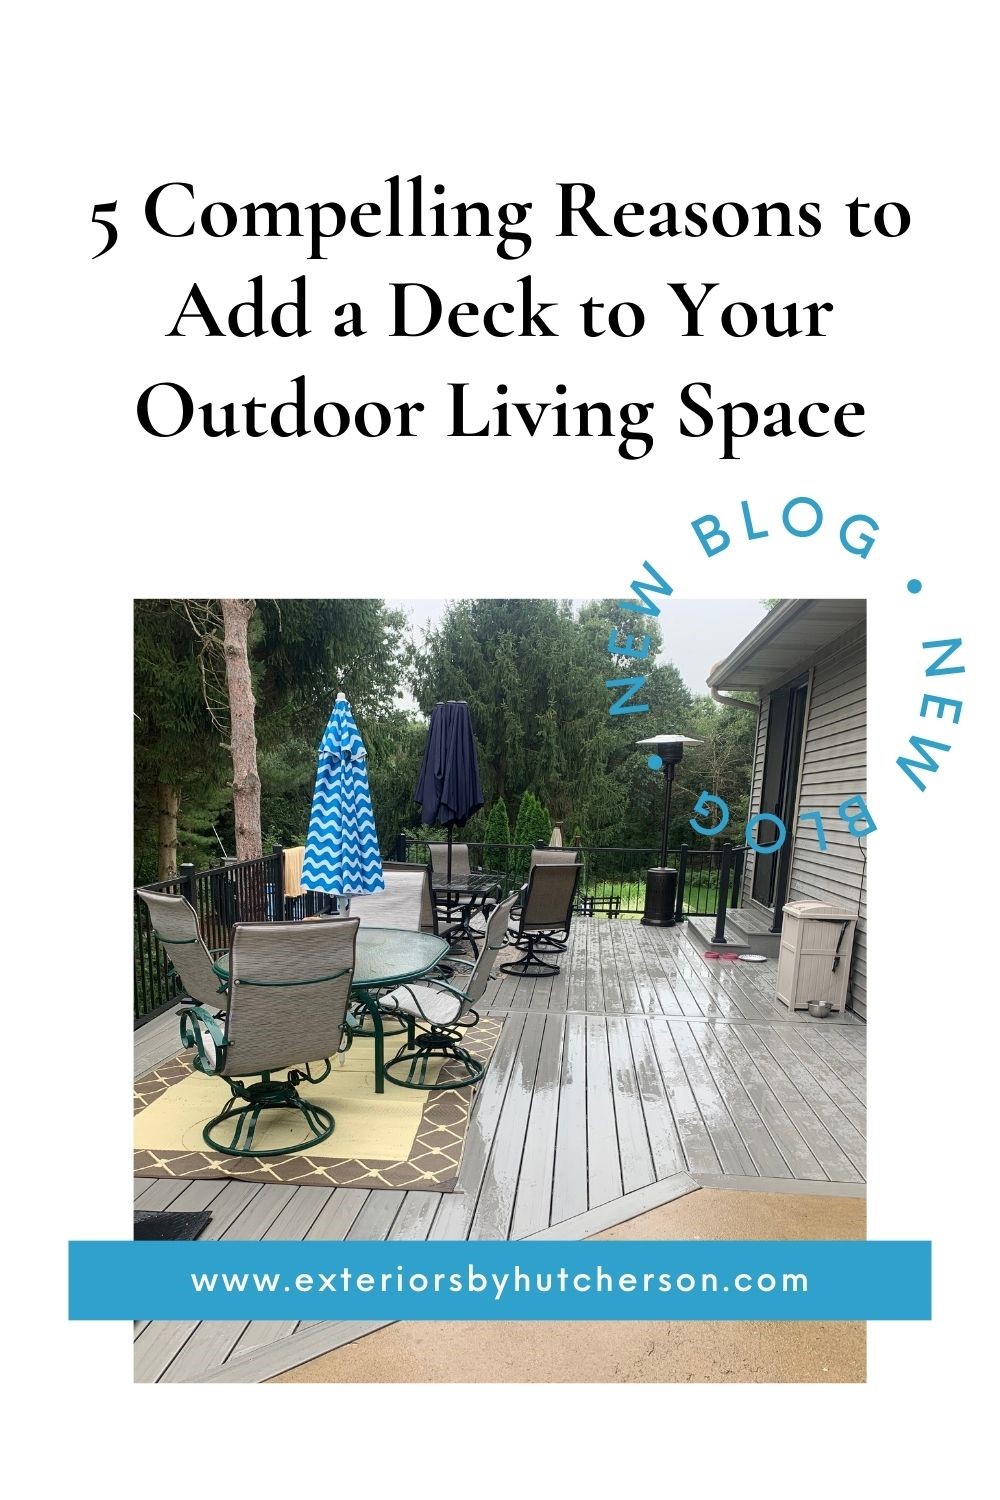 5 Compelling Reasons to Add a Deck to Your Outdoor Living Space